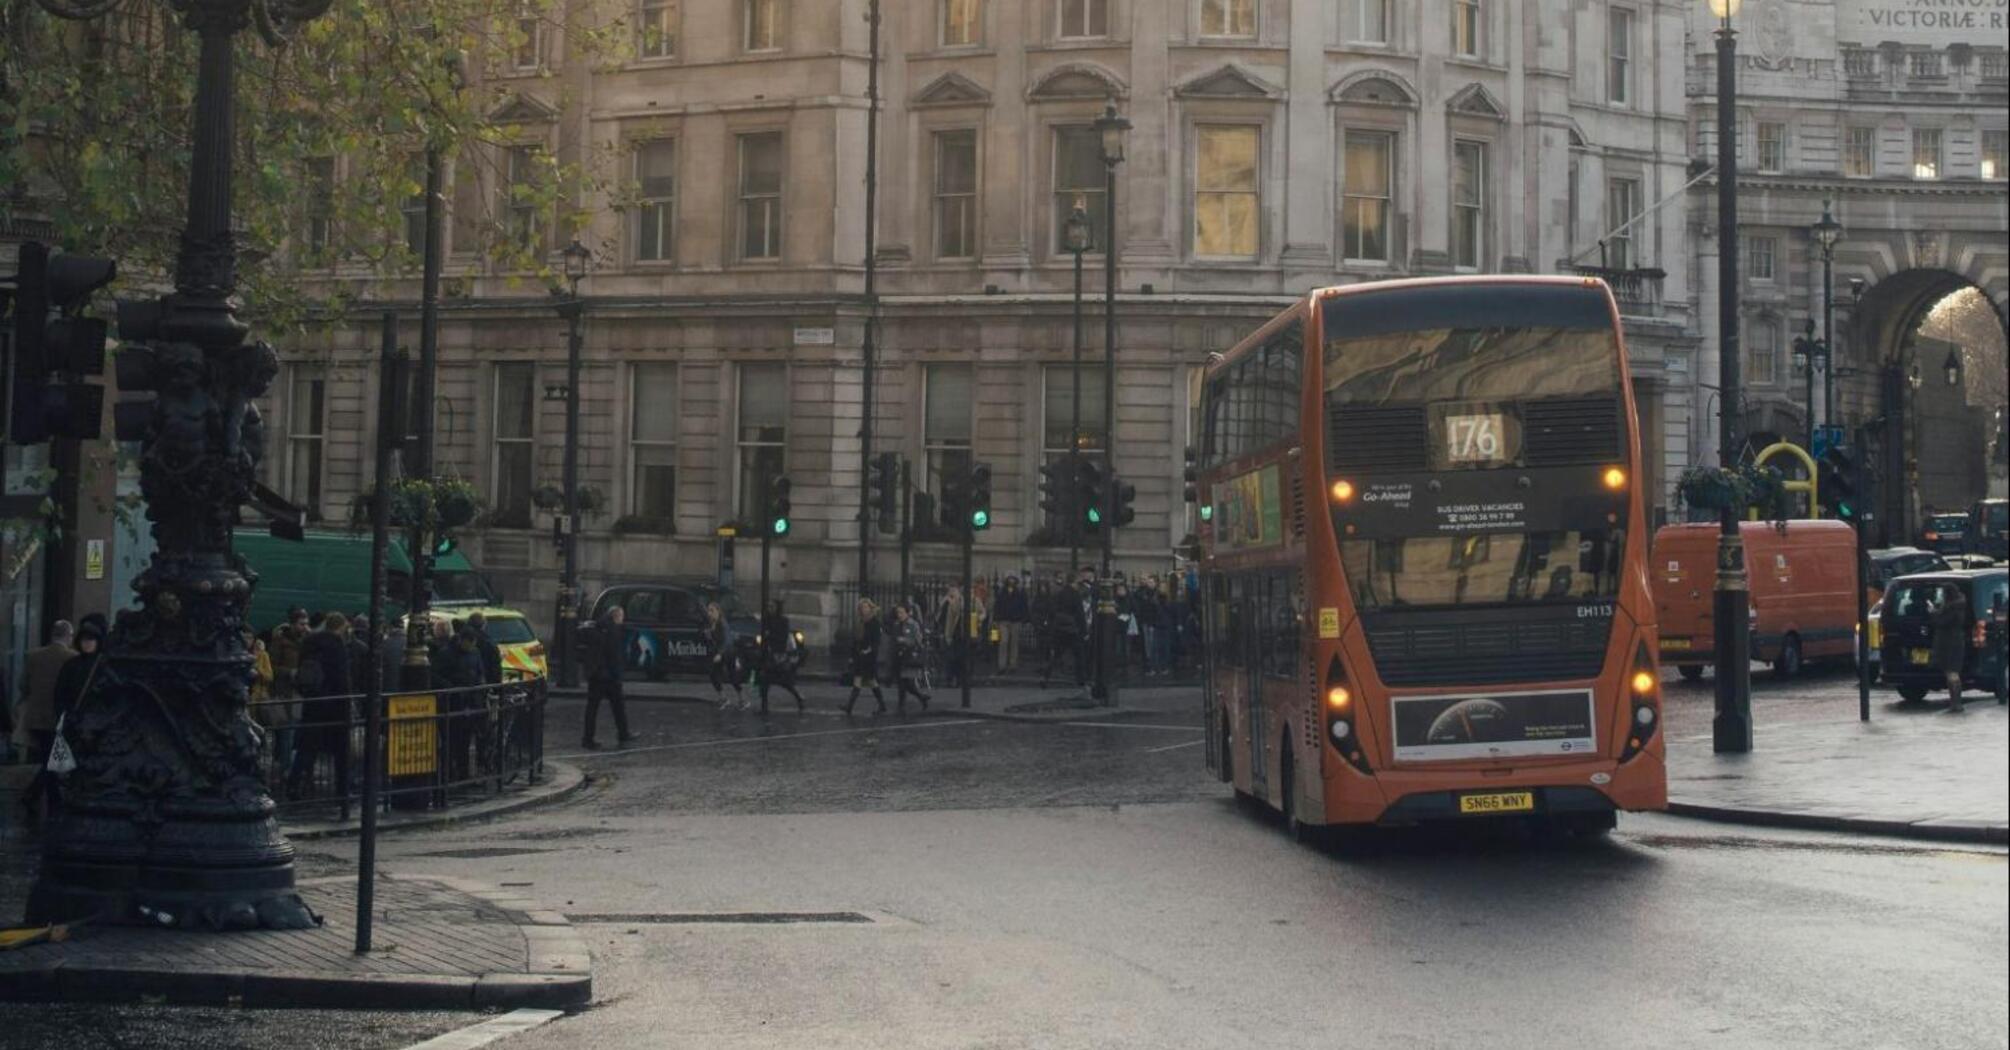 A double-decker bus travels through a busy city intersection in England, with historic buildings in the background and pedestrians crossing the street